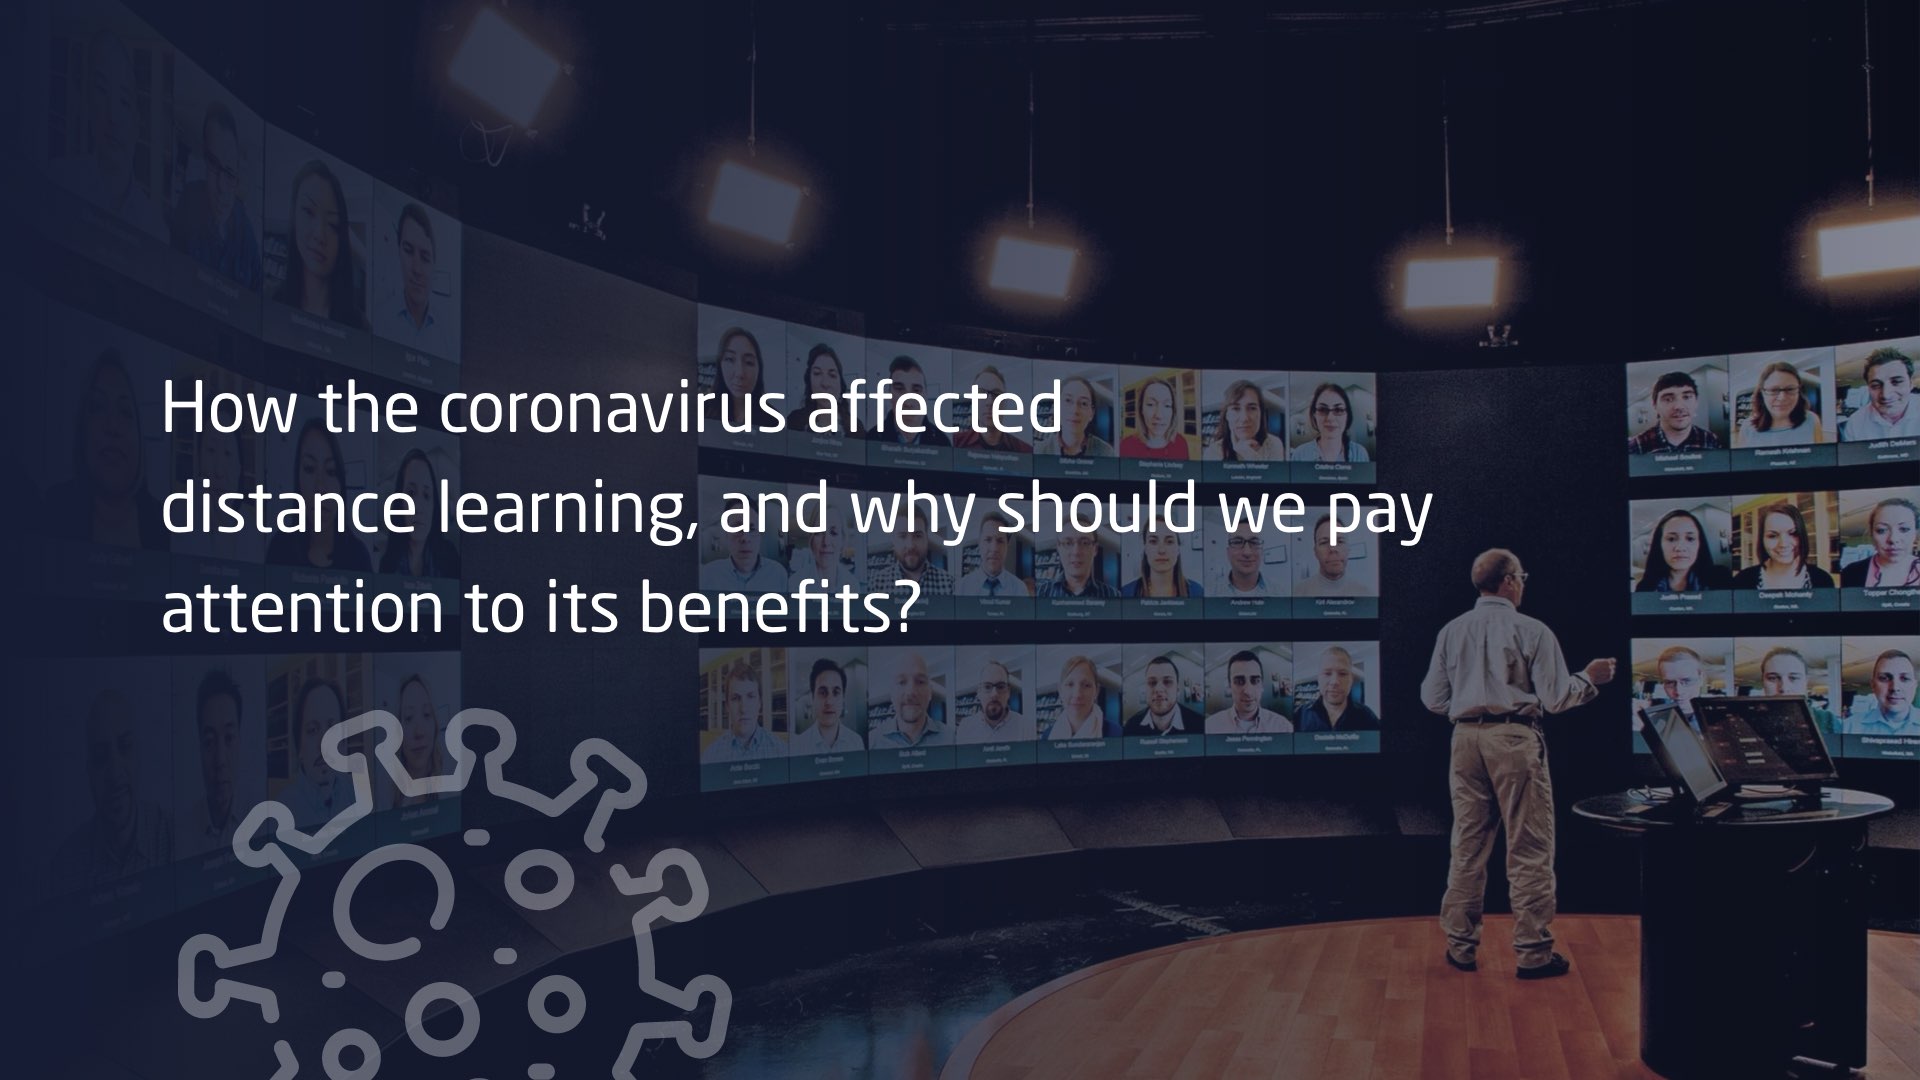 How the coronavirus affected distance learning, and why should we pay attention to its benefits?